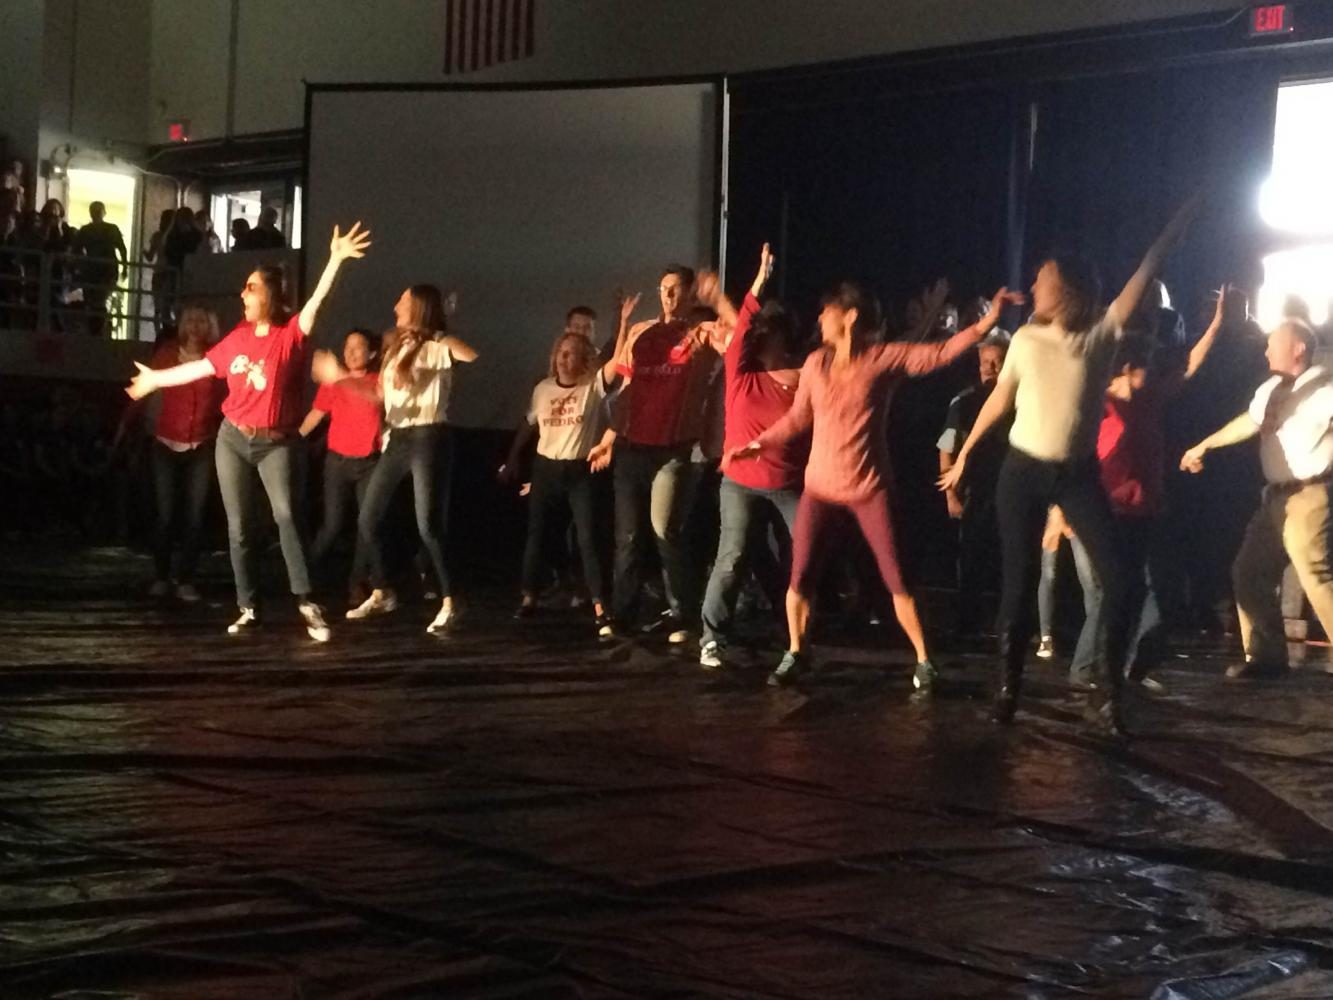 Teachers+and+staff+performed+a+rendition+of+the+dance+from+%E2%80%9CNapoleon+Dynamite%E2%80%9D+to+kick+off+the+assembly.+